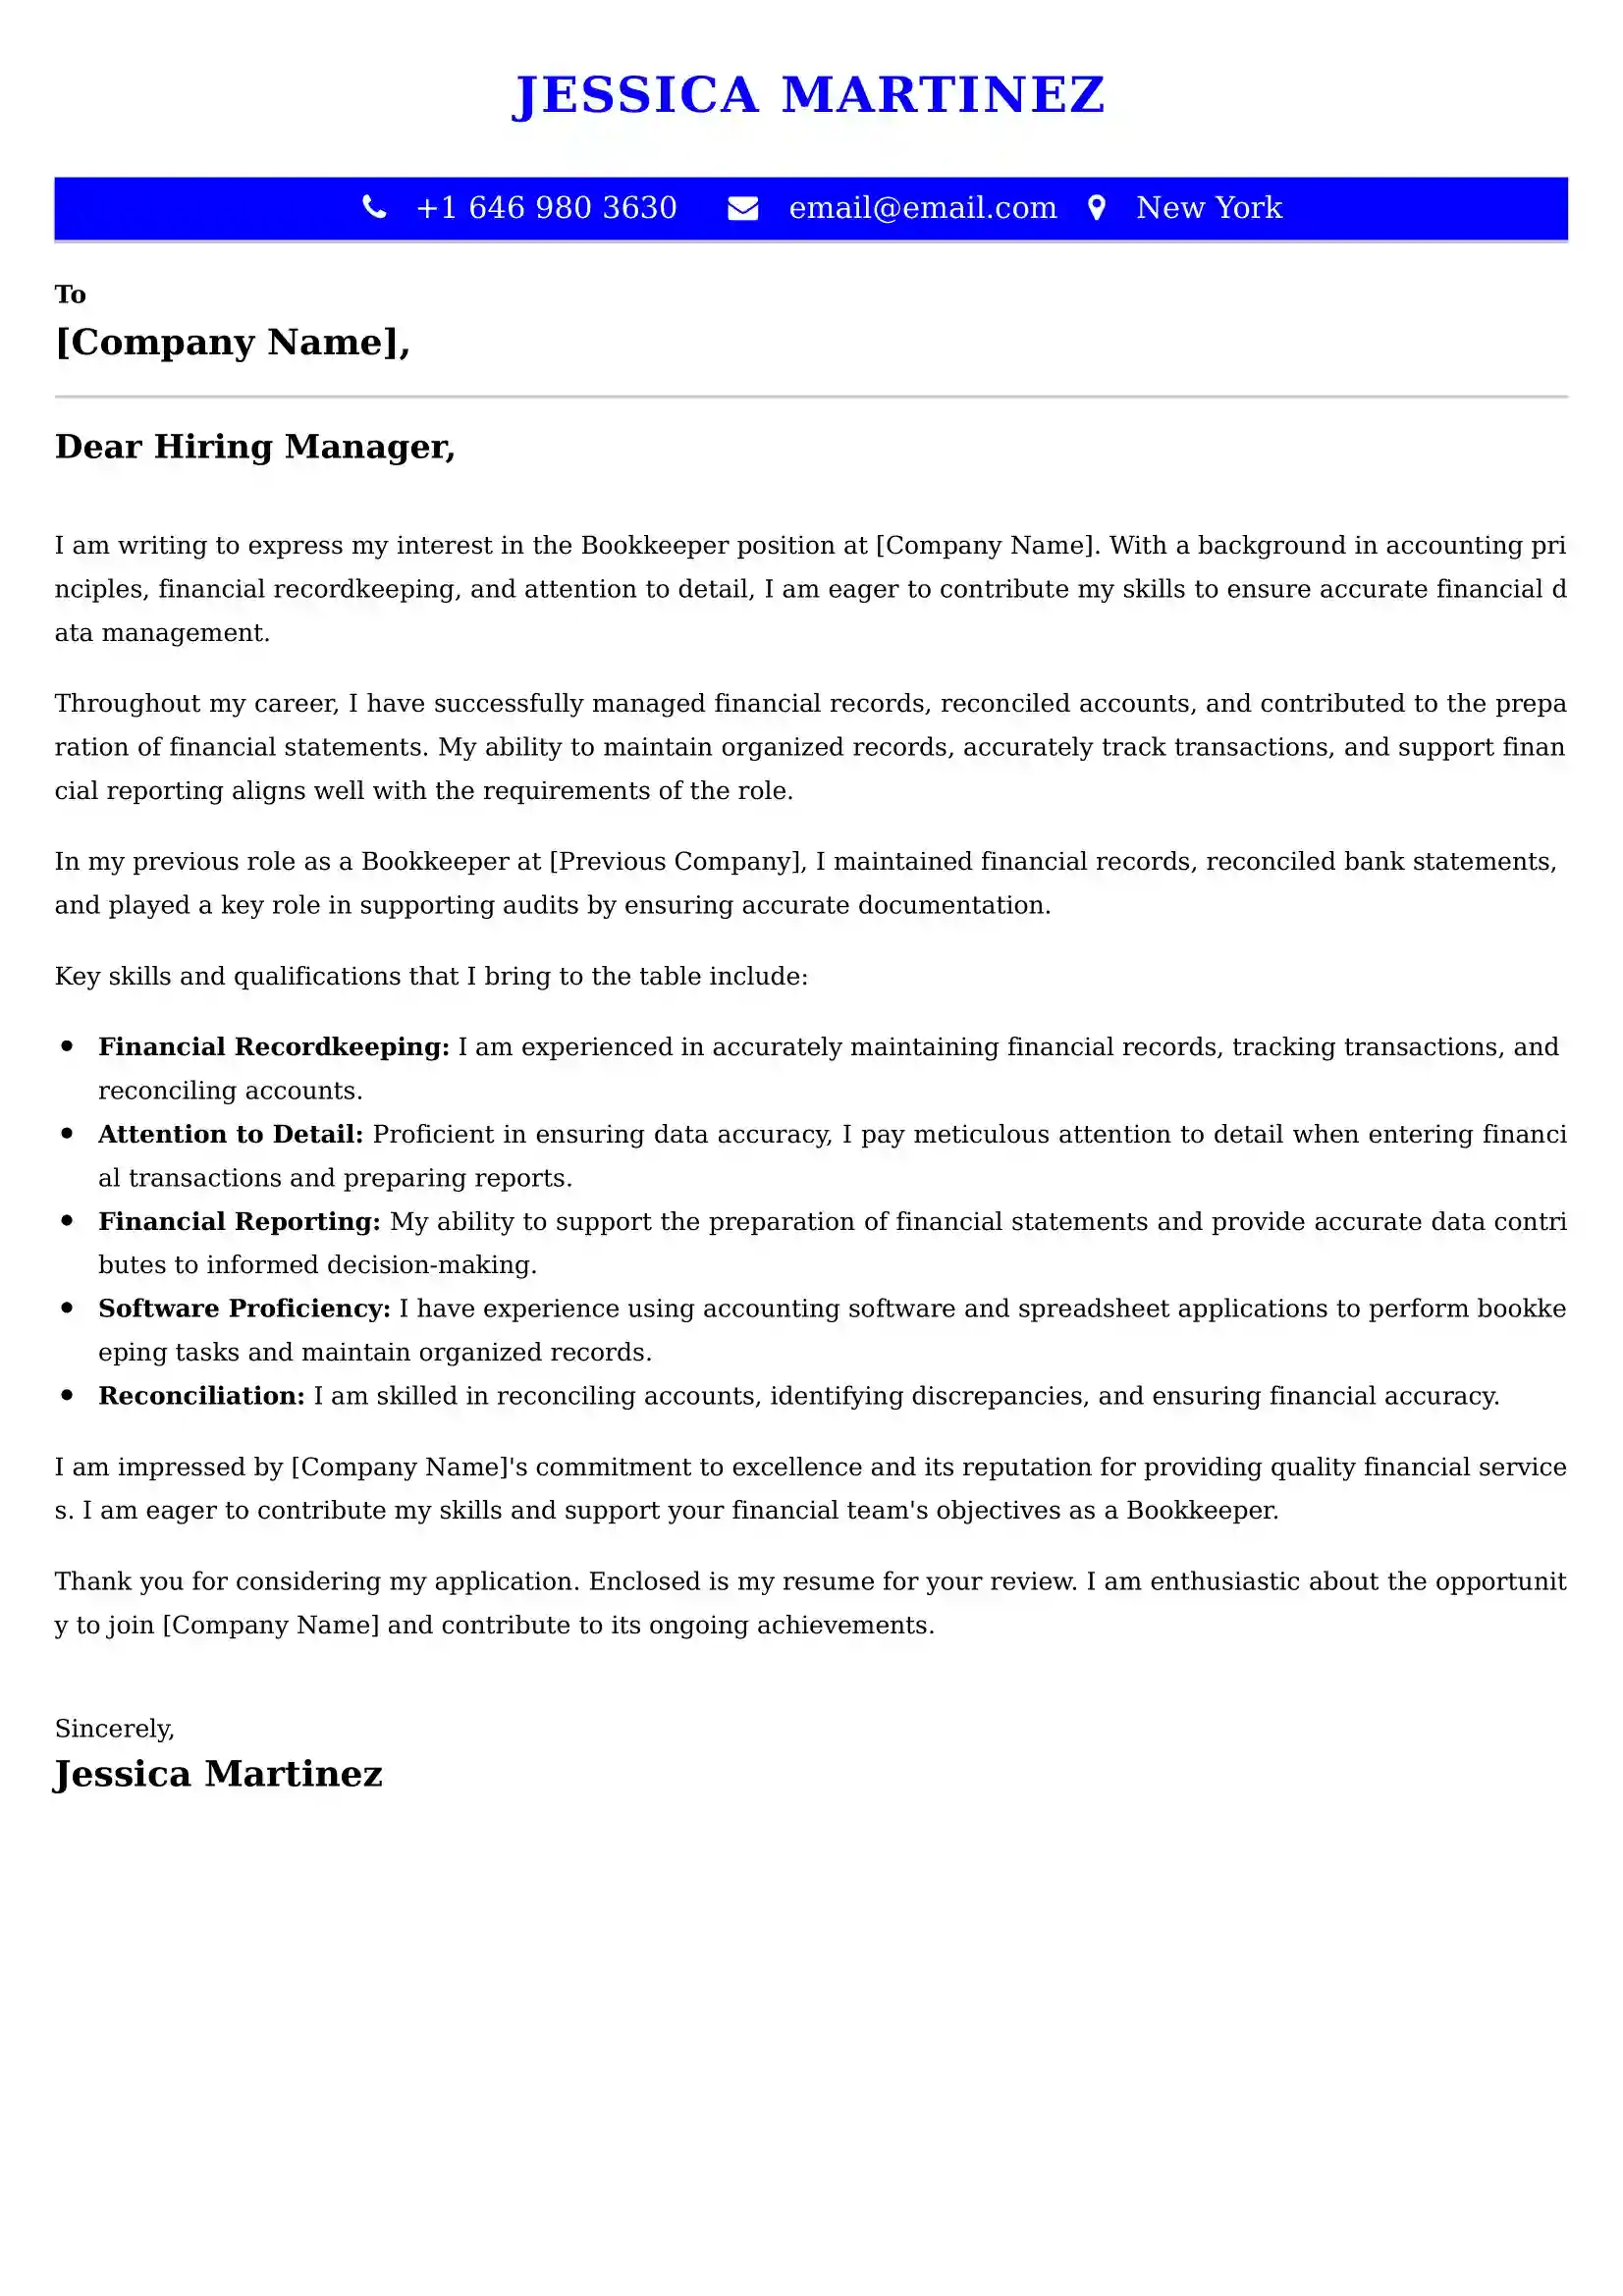 Bookkeeper Cover Letter Examples Australia